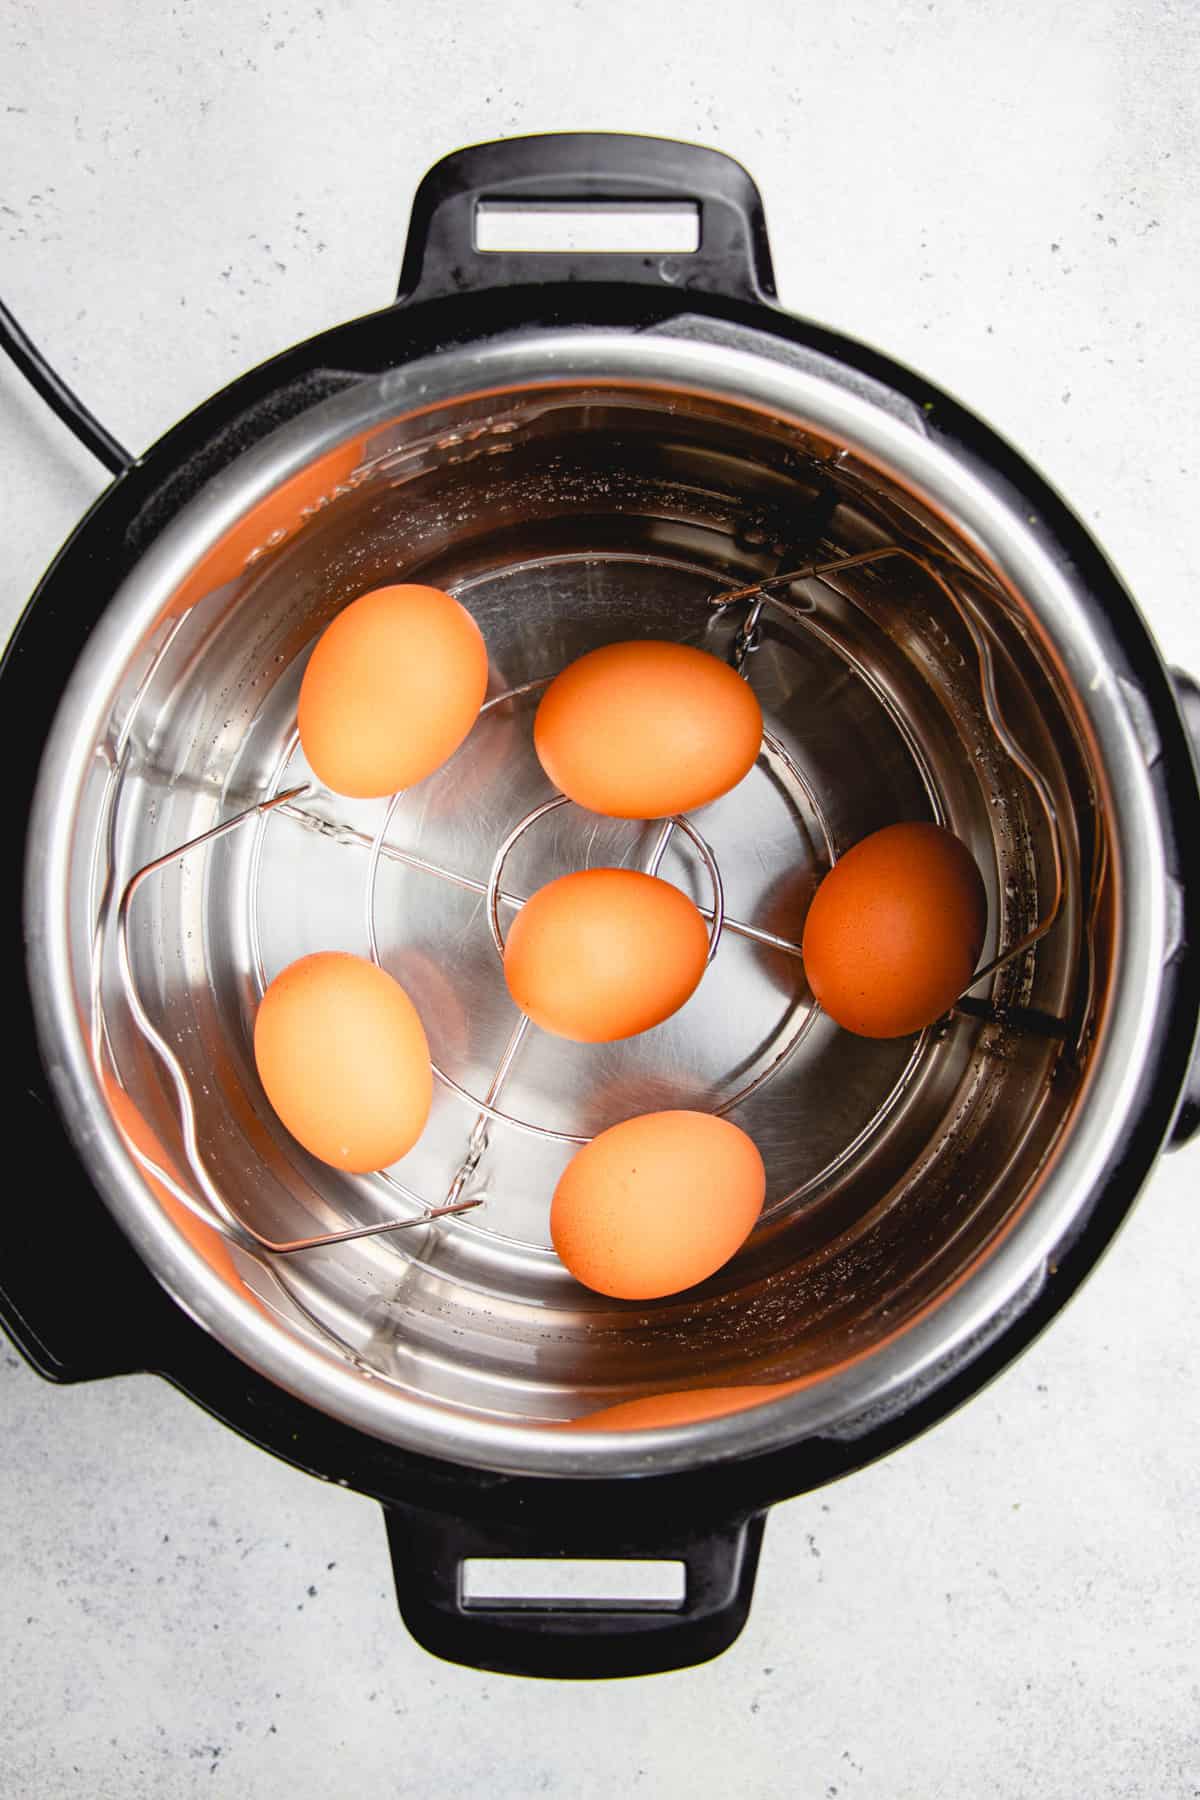 Large brown eggs are laying inside Instant Pot.